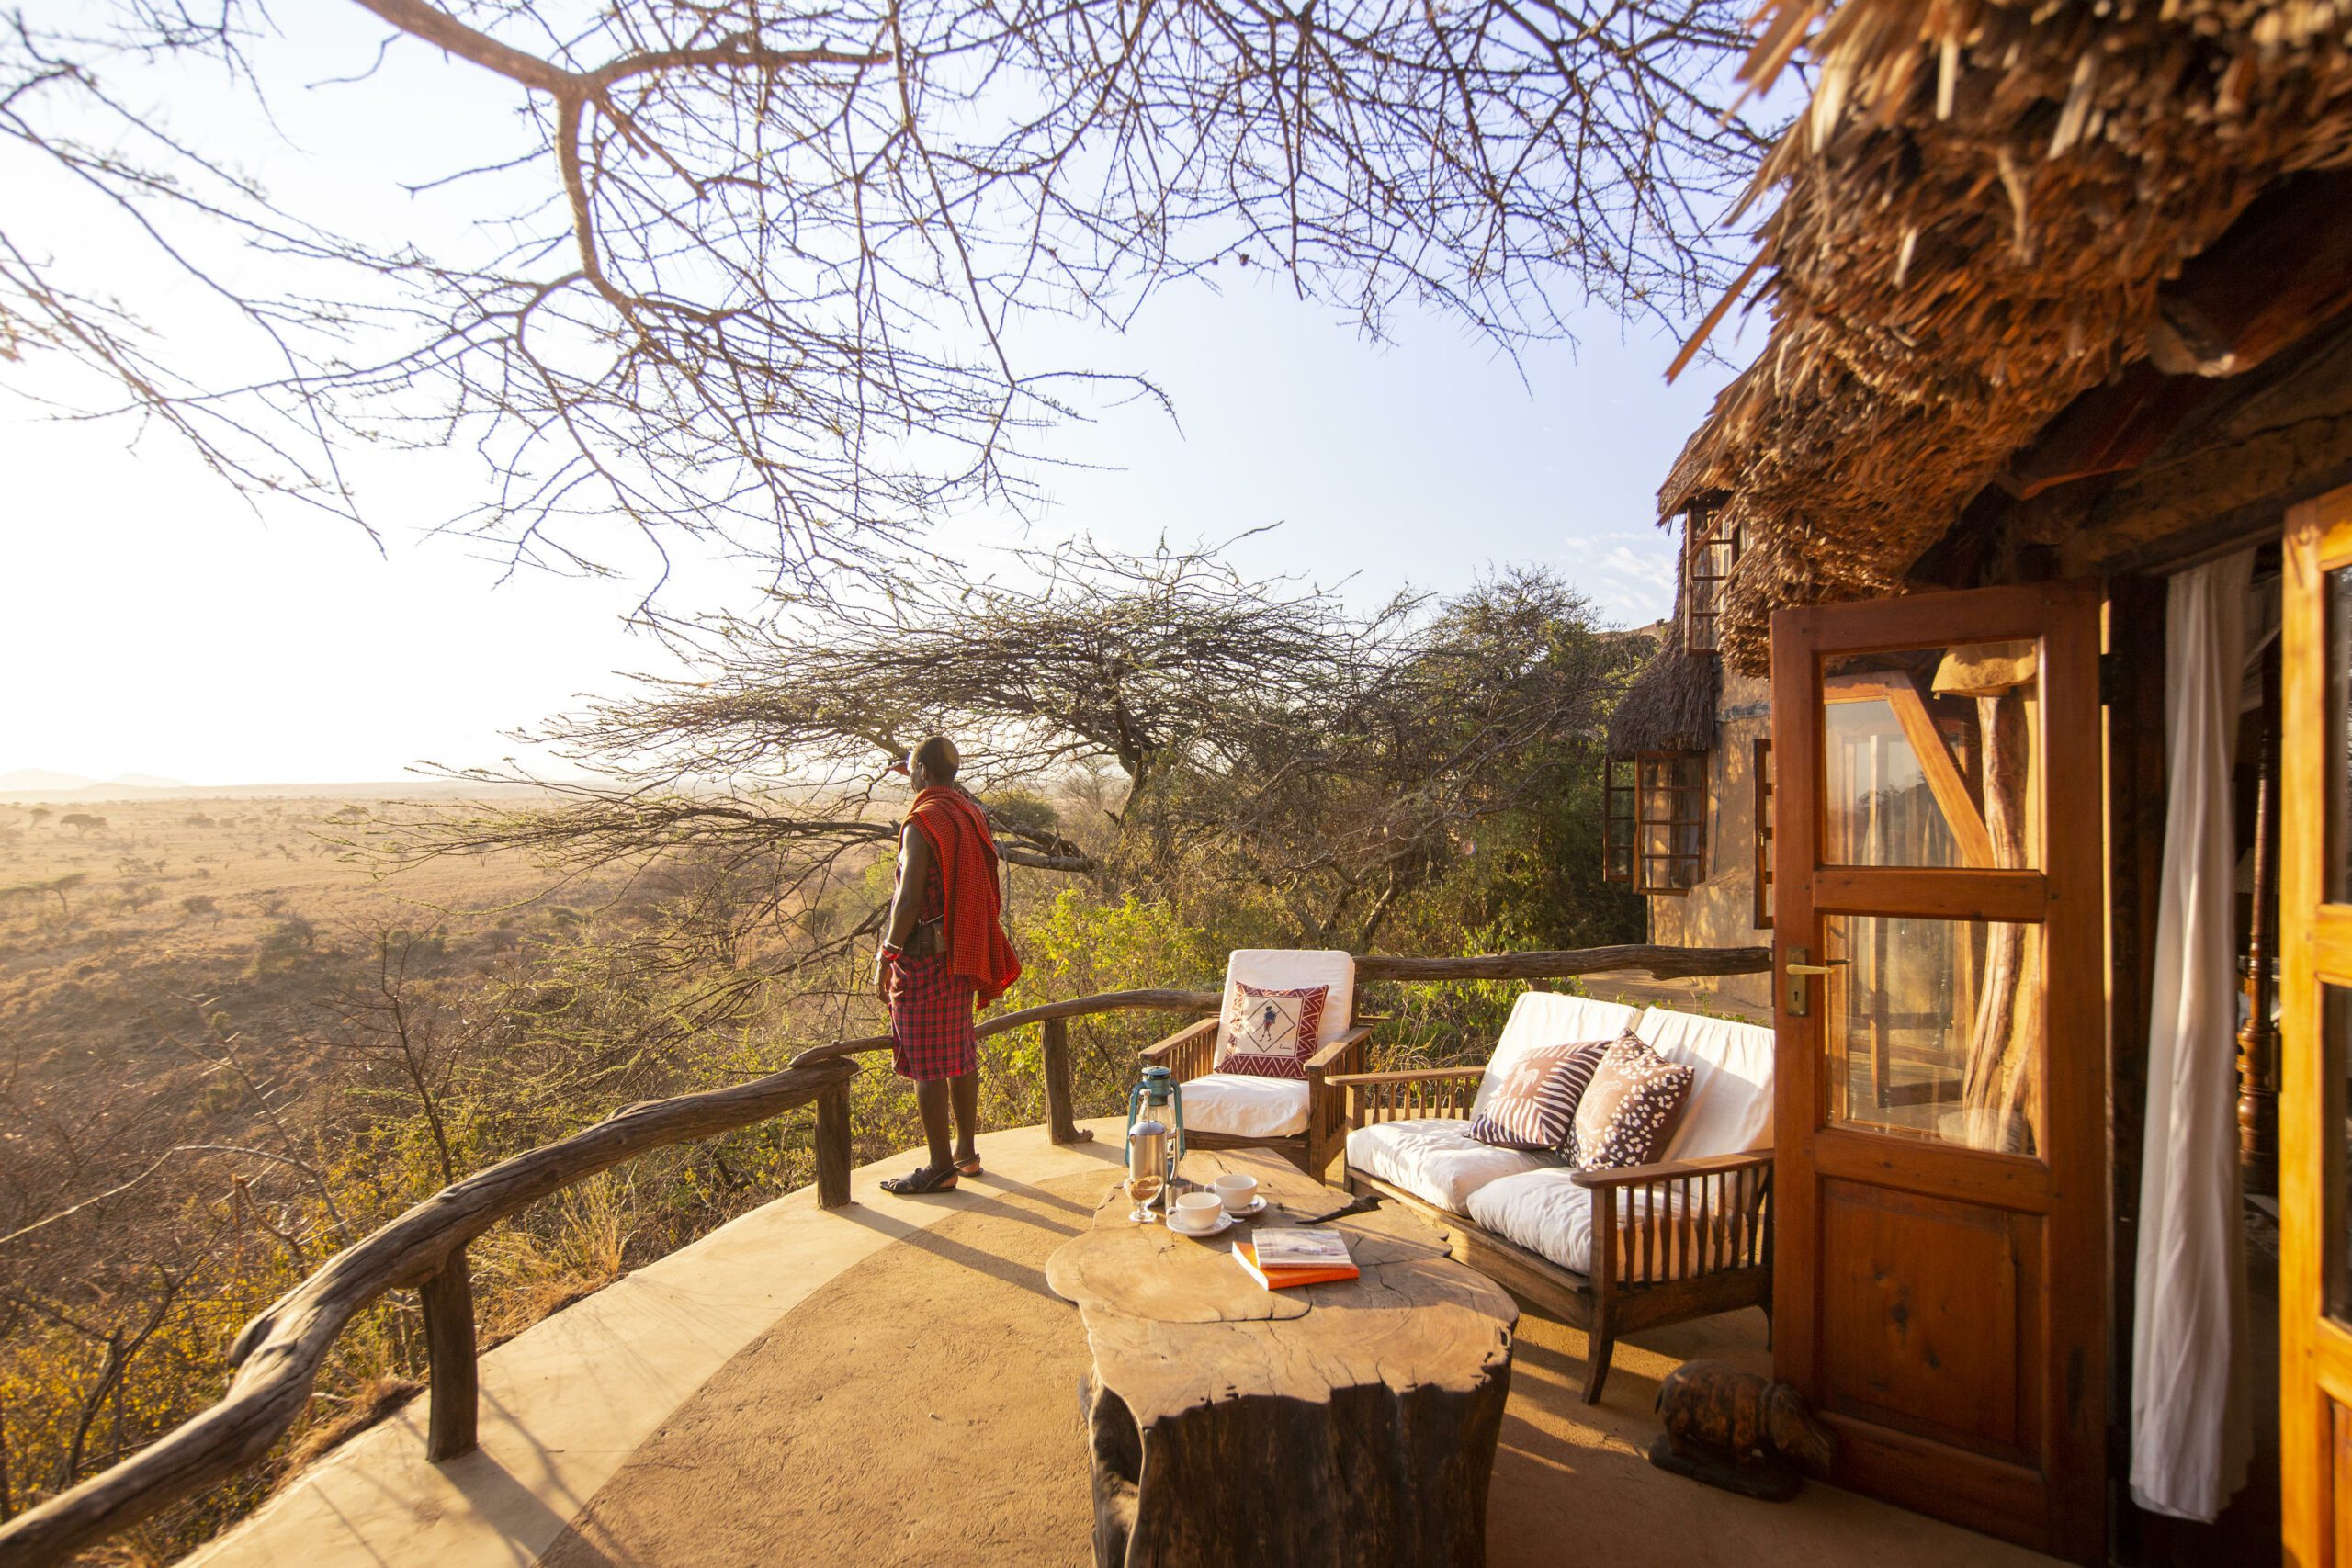 View of a Maasai man standing on a deck of a room at Lewa Wilderness Camp in Kenya